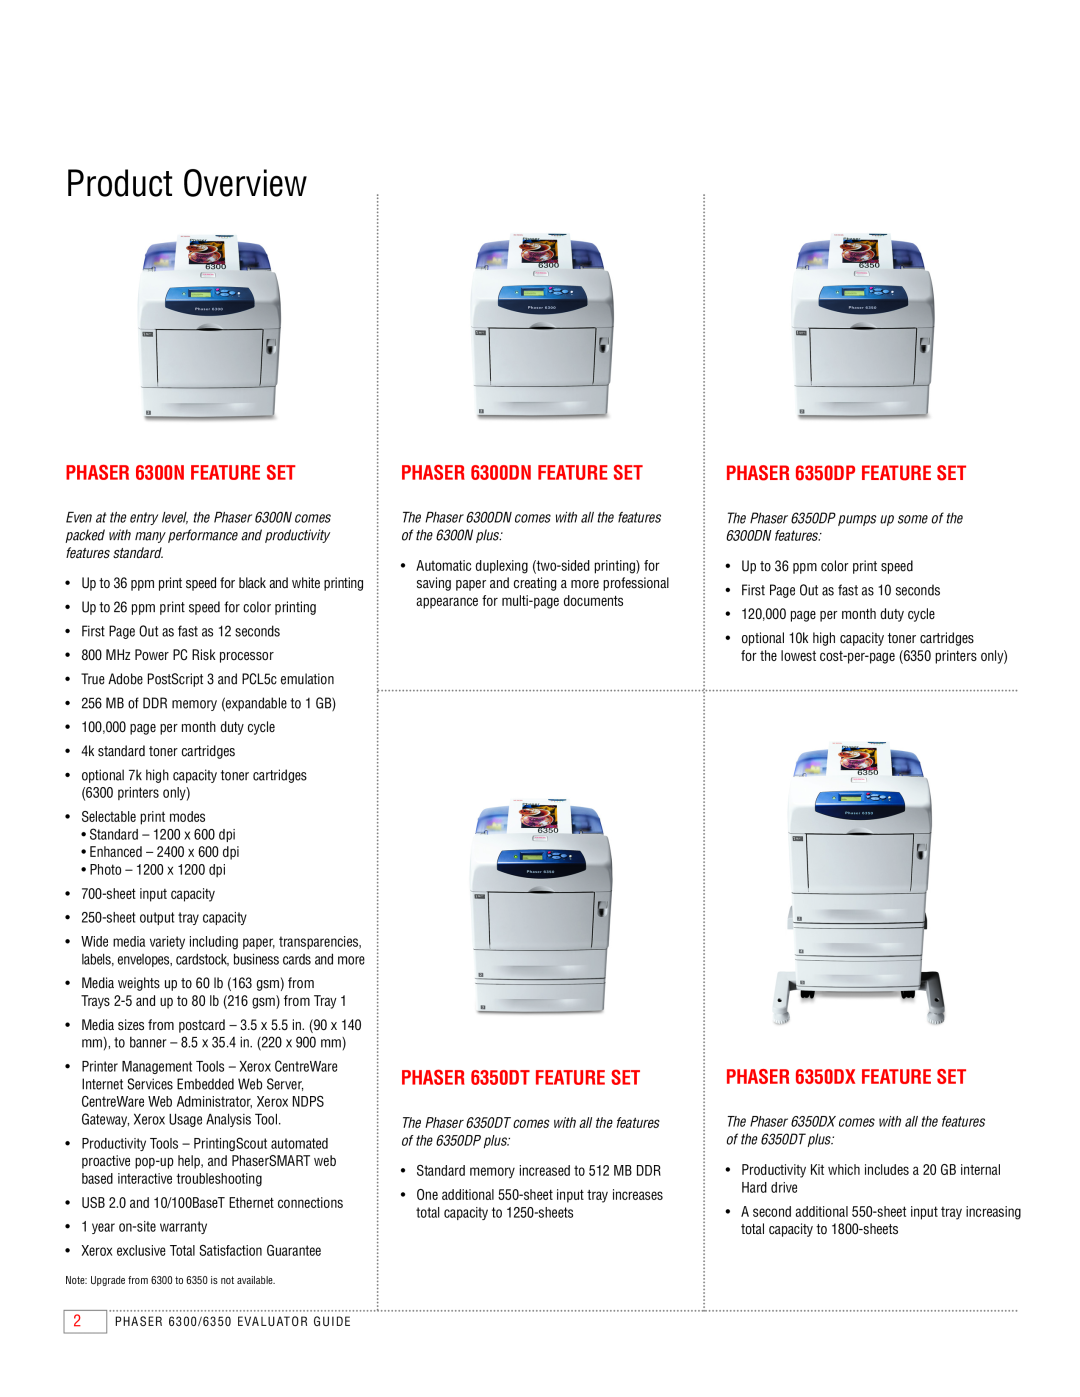 Xerox manual Product Overview, PHASER 6300N FEATURE SET, PHASER 6300DN FEATURE SET, PHASER 6350DT FEATURE SET 